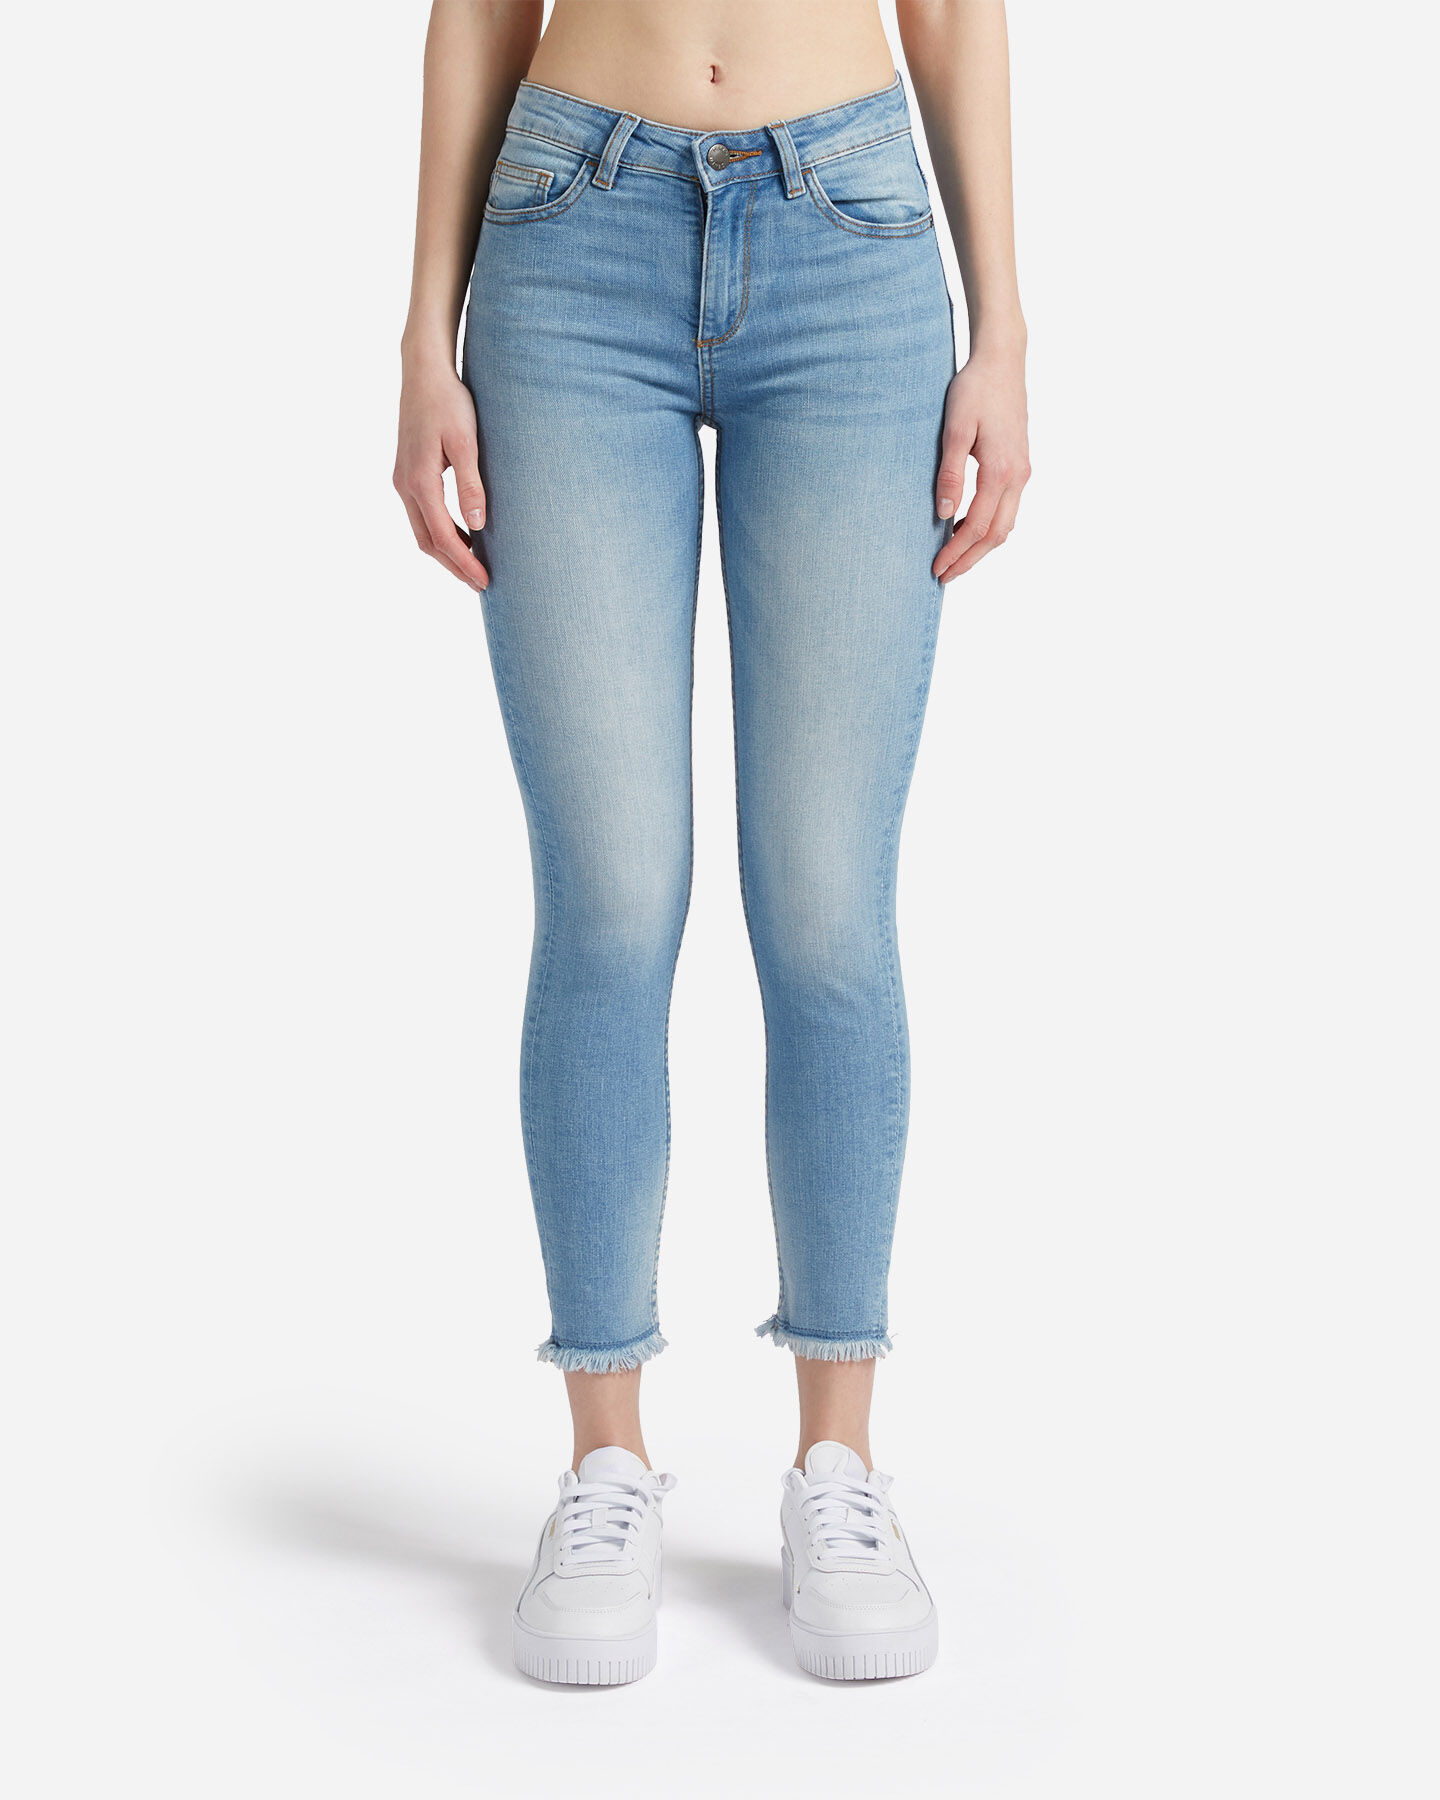  Jeans DACK'S DENIM PROJECT W S4118475|LD|40 scatto 0